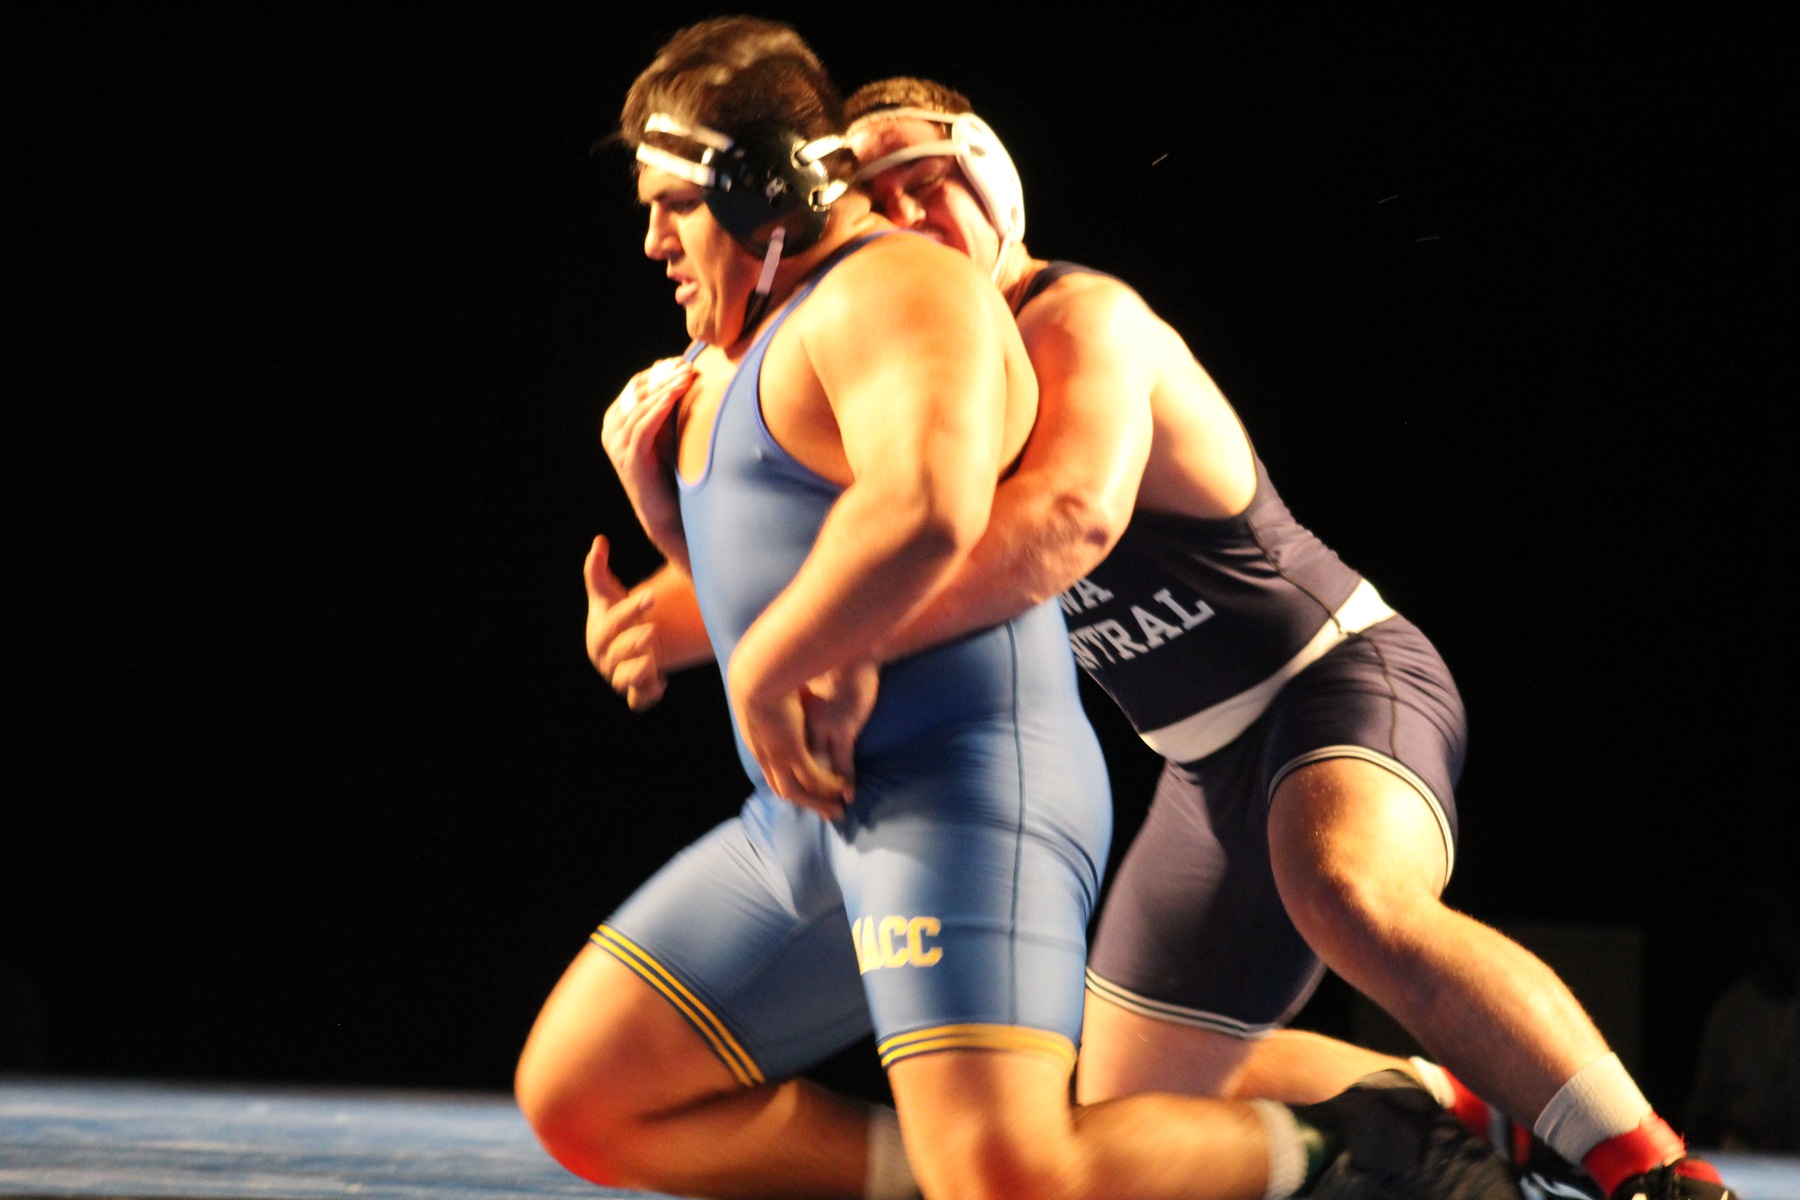 Mario Pena tries to escape from Iowa Central's Thomas Petersen in the 285-pound title bout Saturday night.